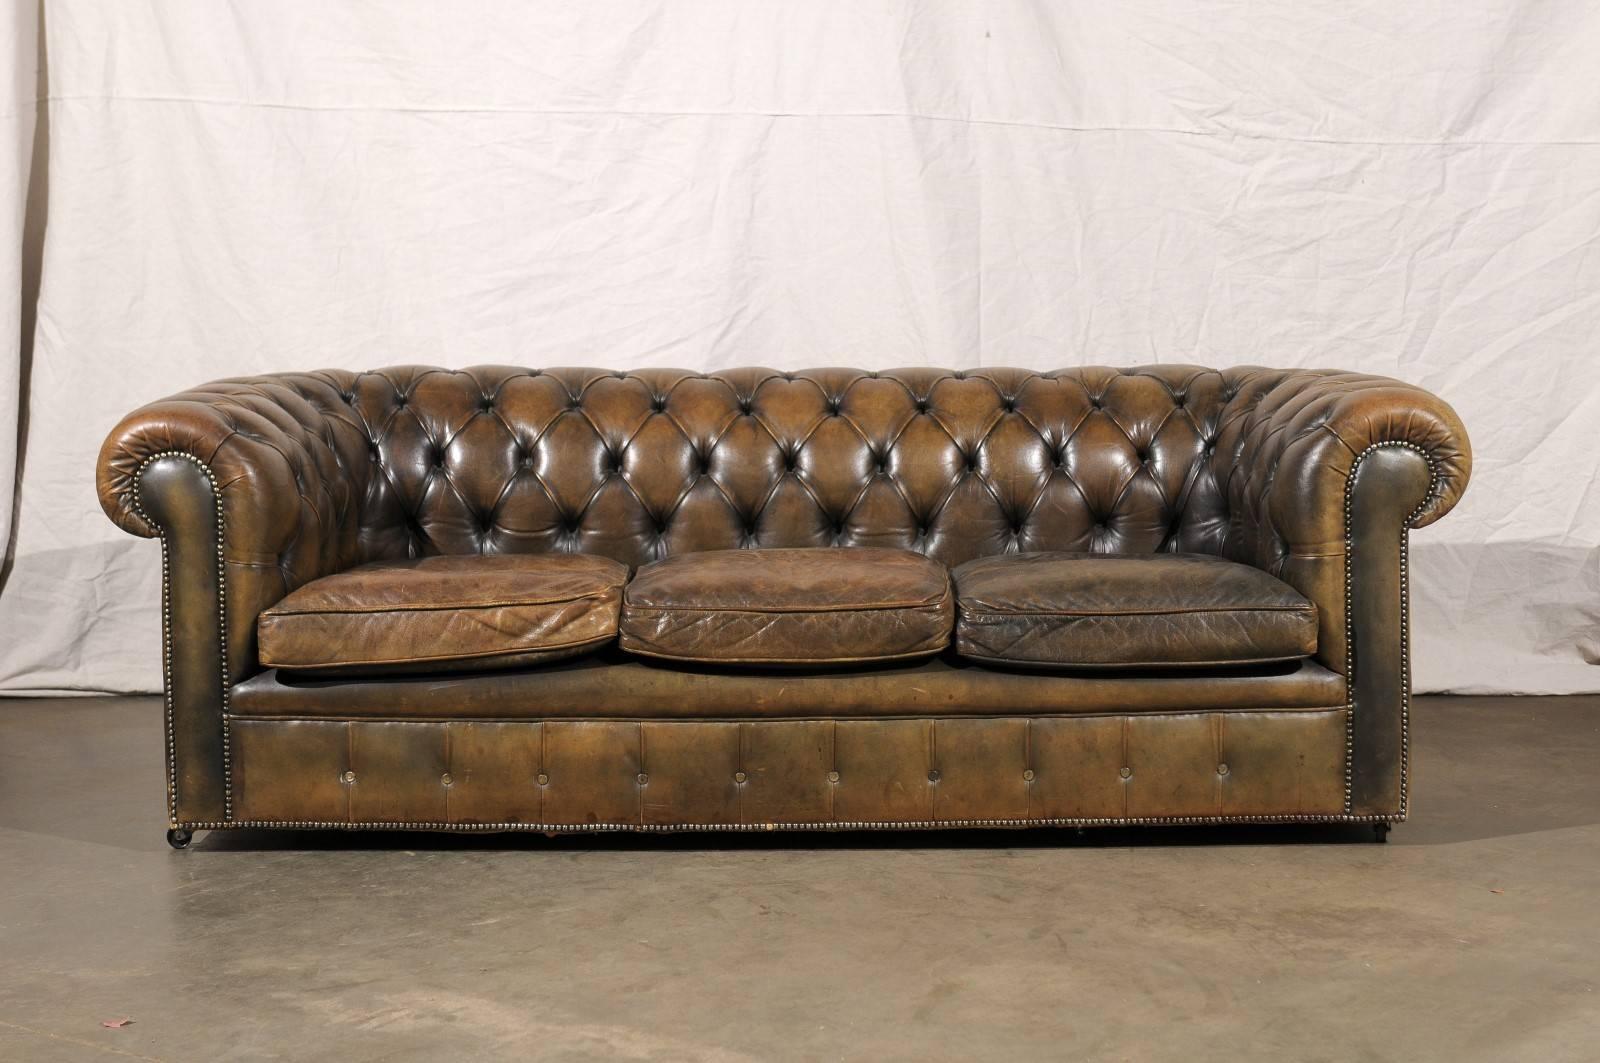 20th Century English Chesterfield sofa, purchased in England  Seat height 17 